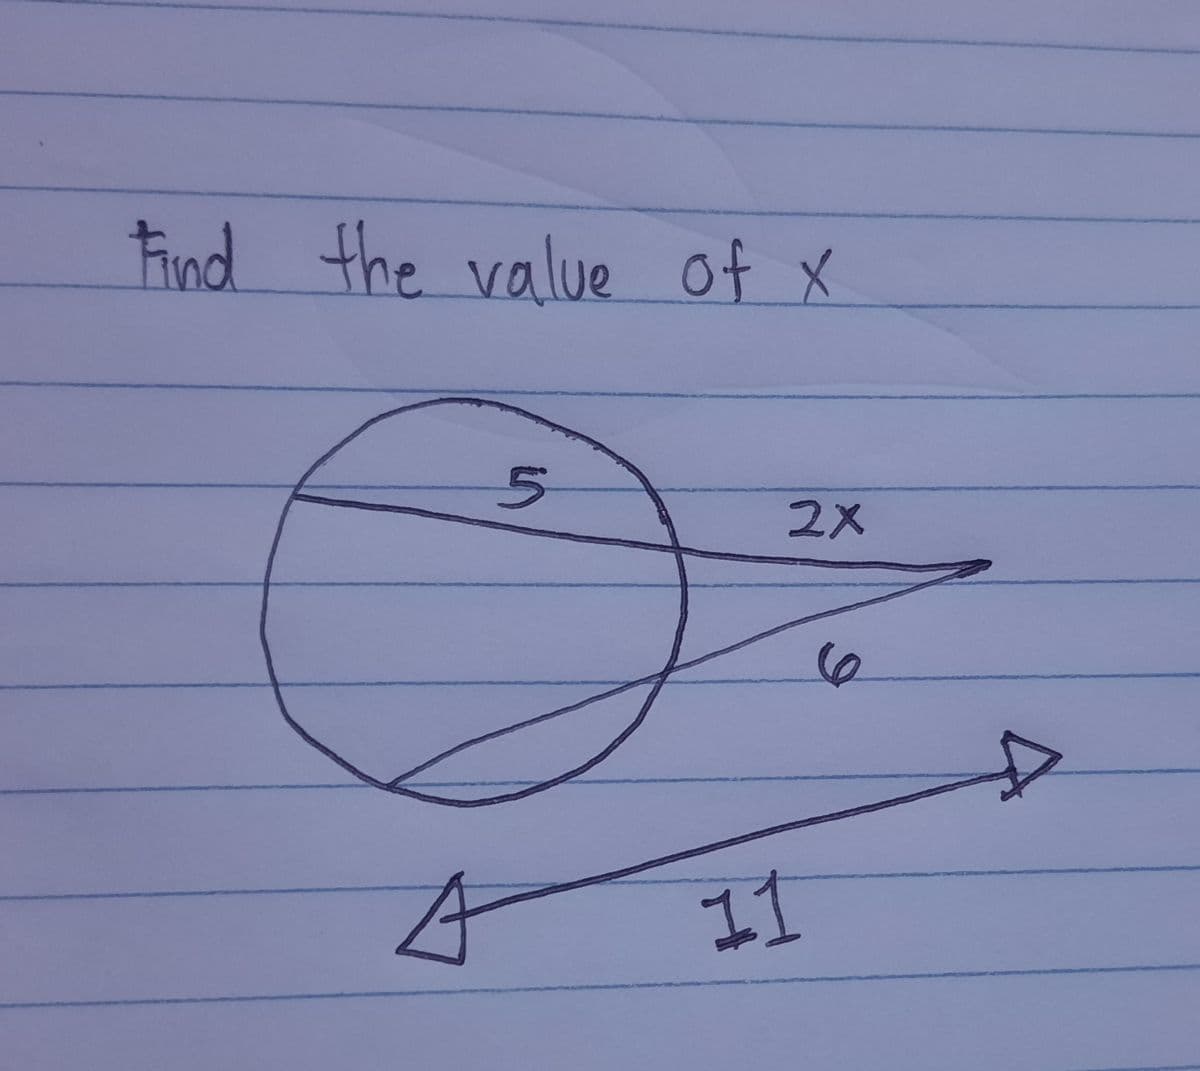 Find the value of x
2X
6)
11
